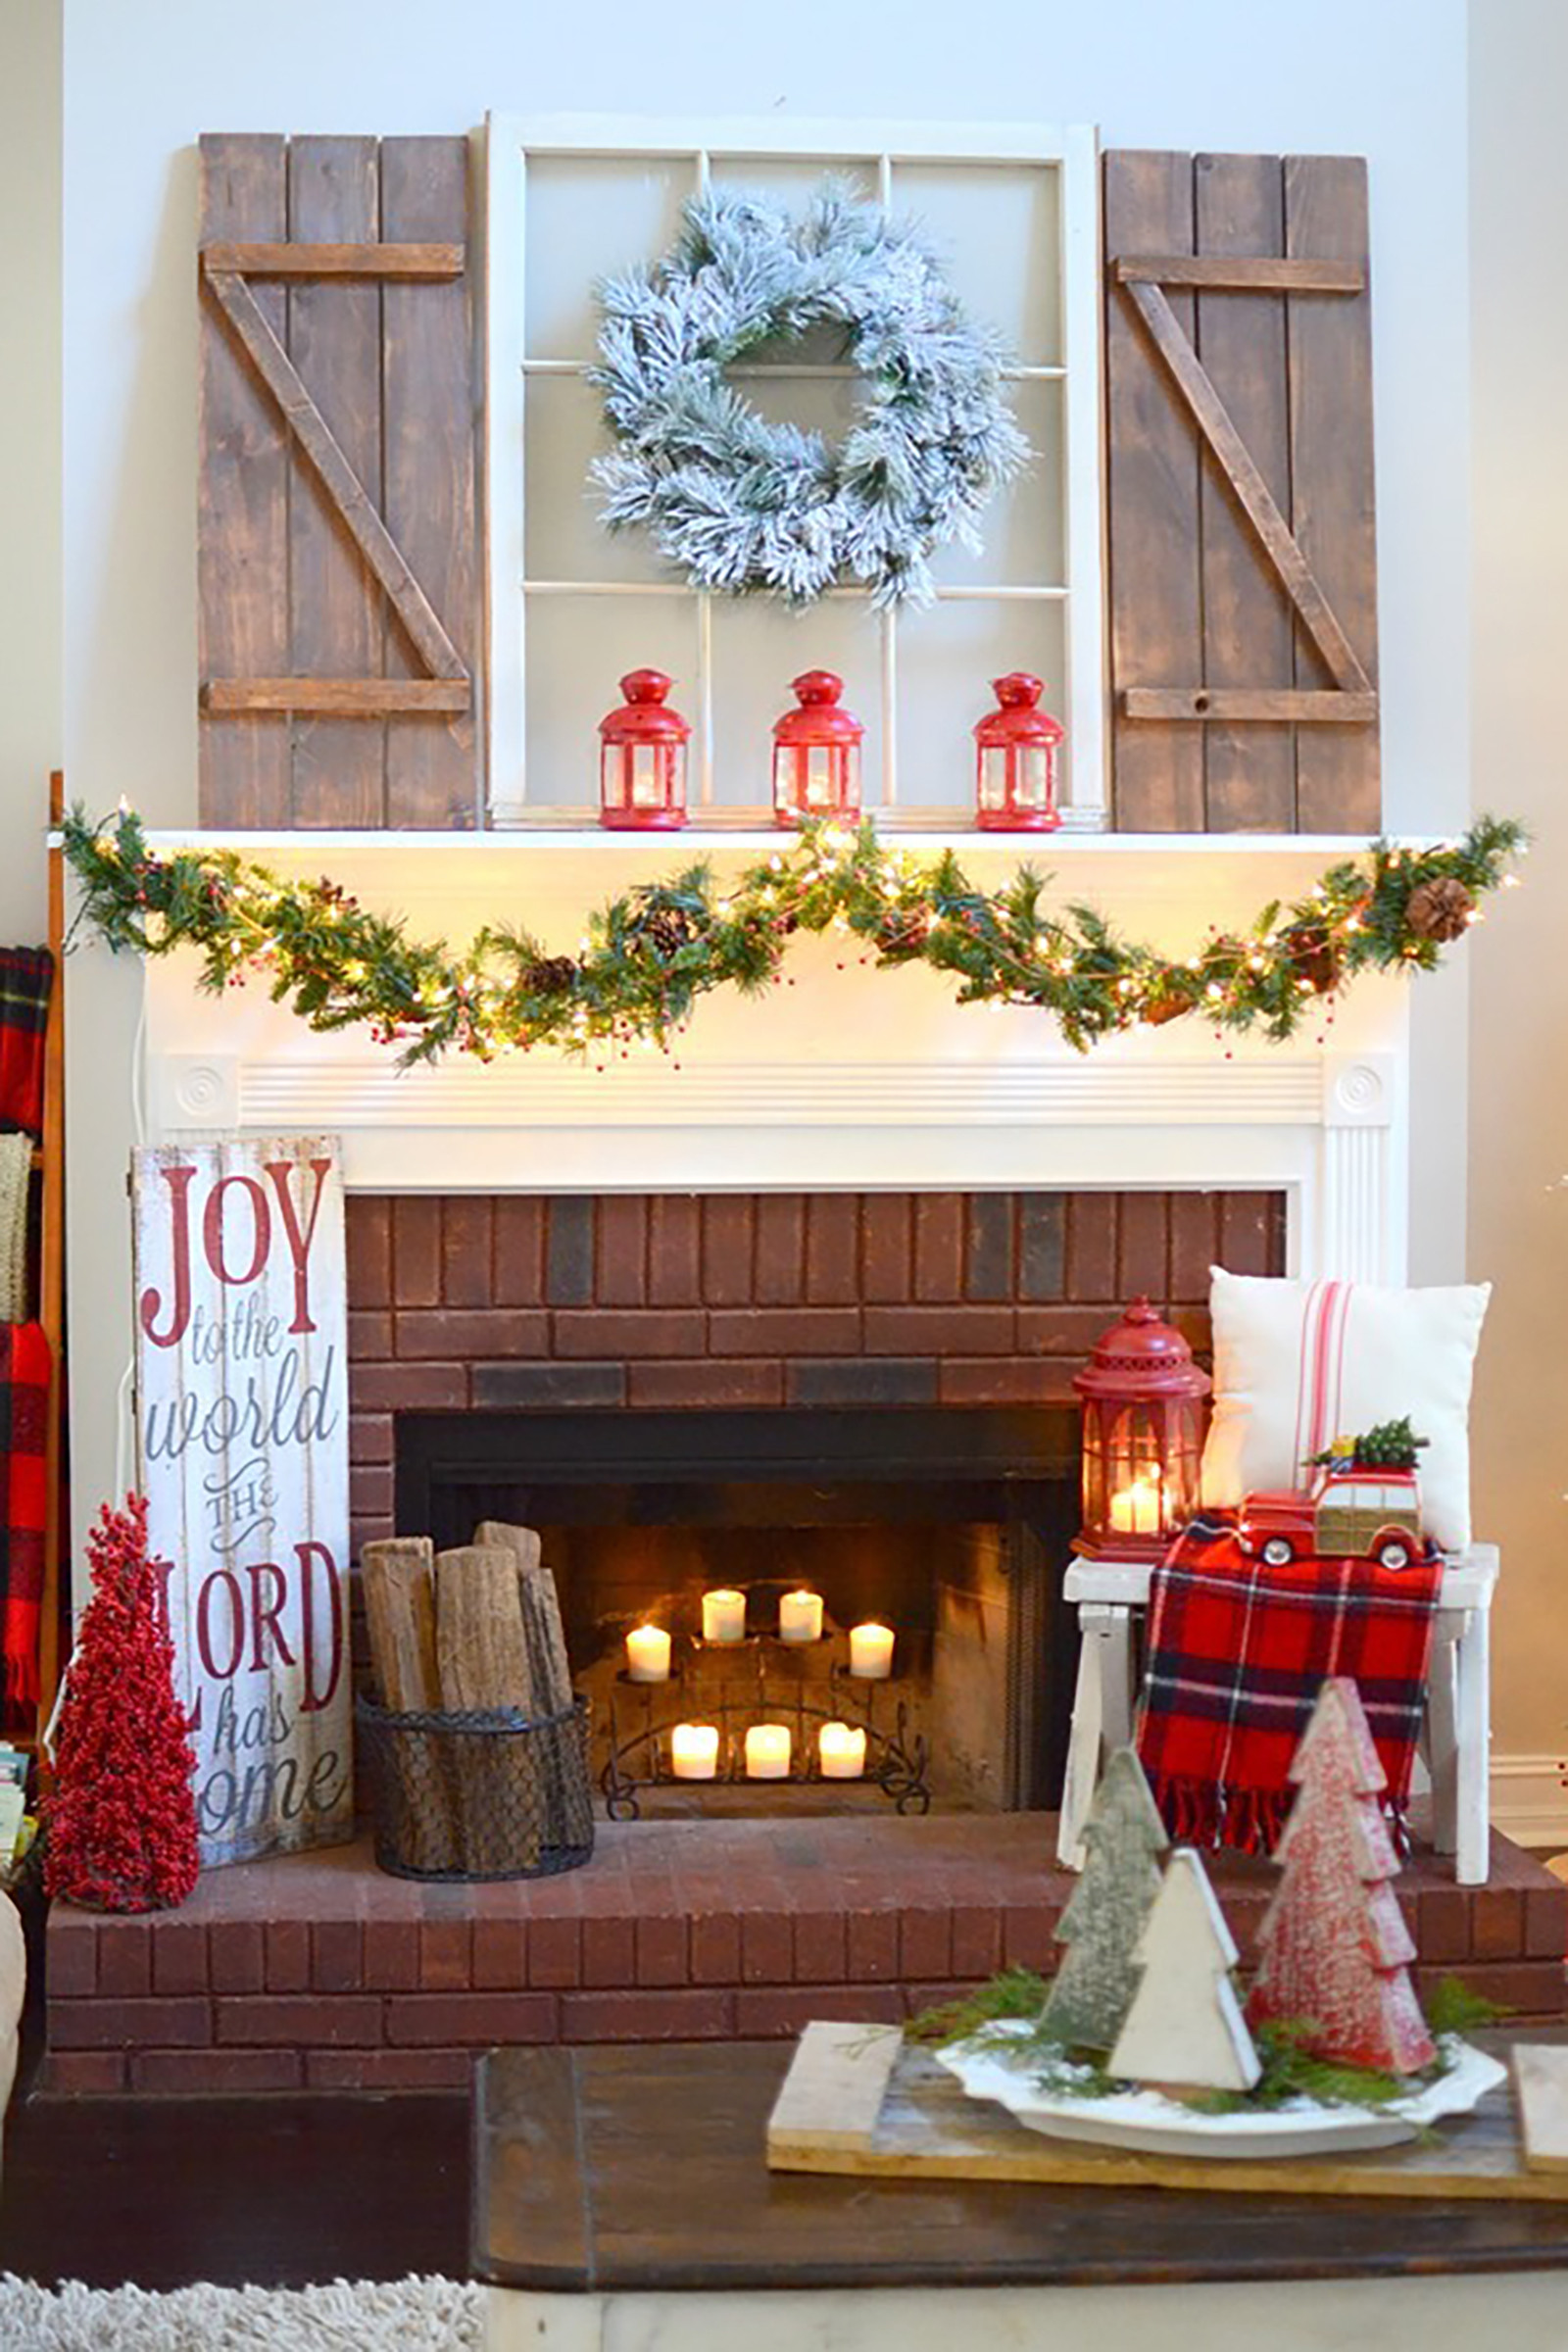 Decorated Fireplace For Christmas
 35 Christmas Mantel Decorations Ideas for Holiday